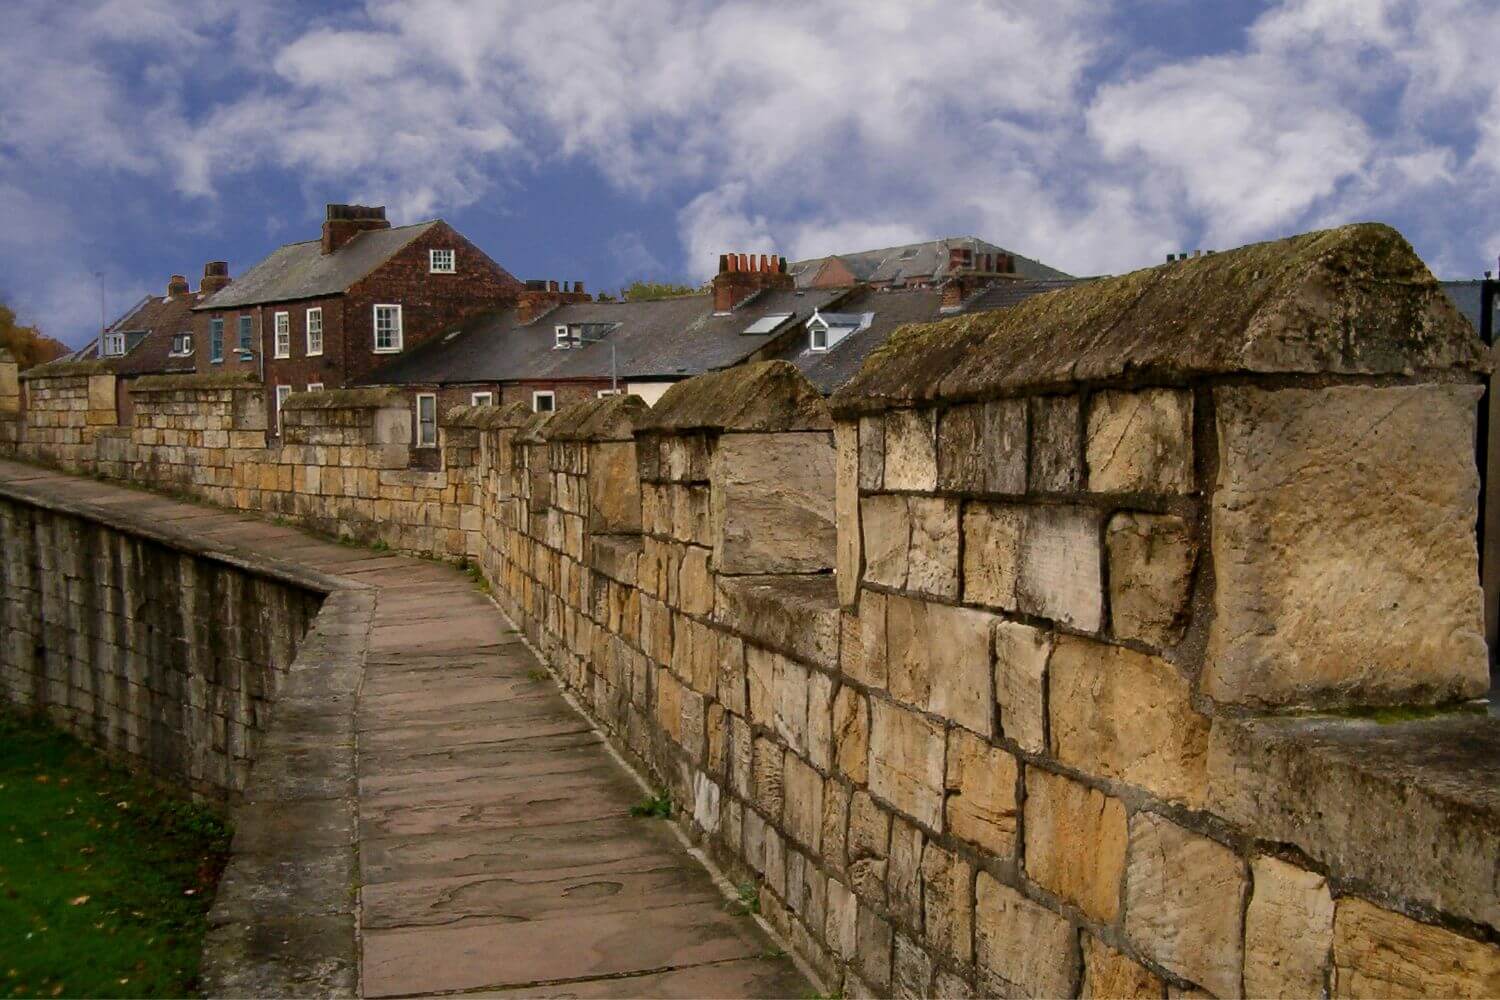 Walk along the York City Walls on your day out